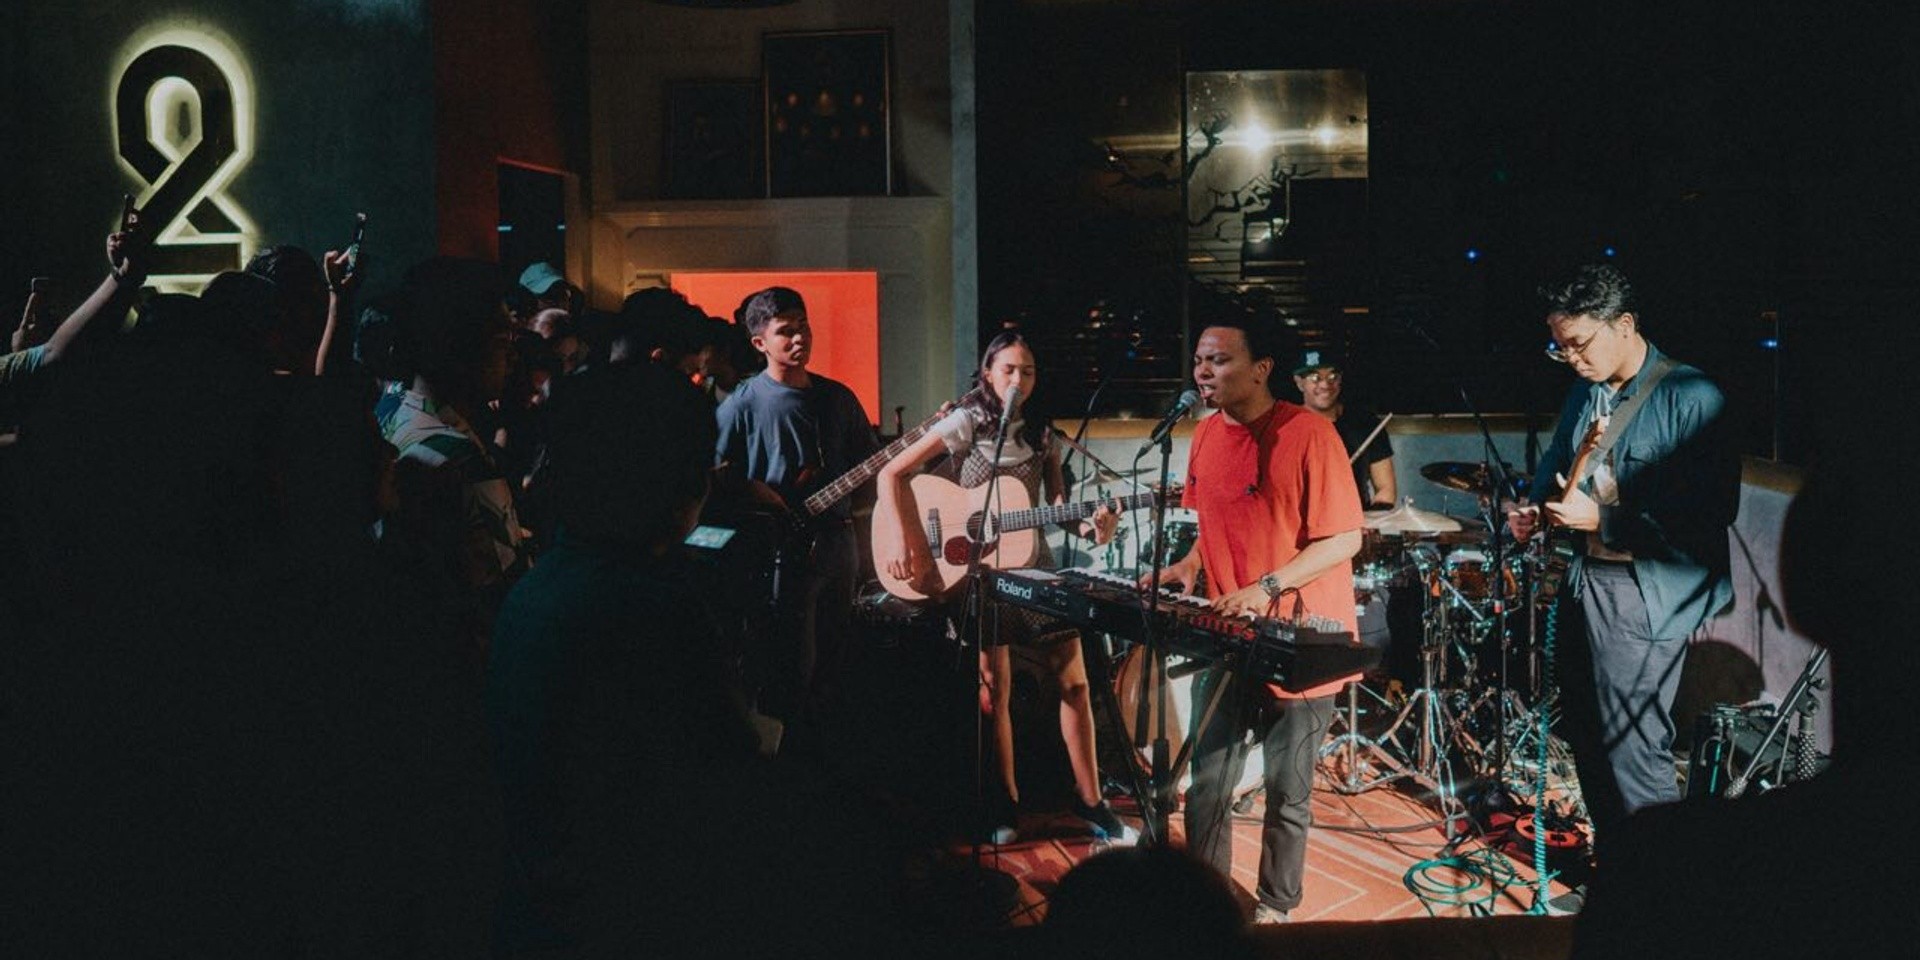 Amadeo makes debut with Clara Benin on new single 'Different Kind of Love' – listen